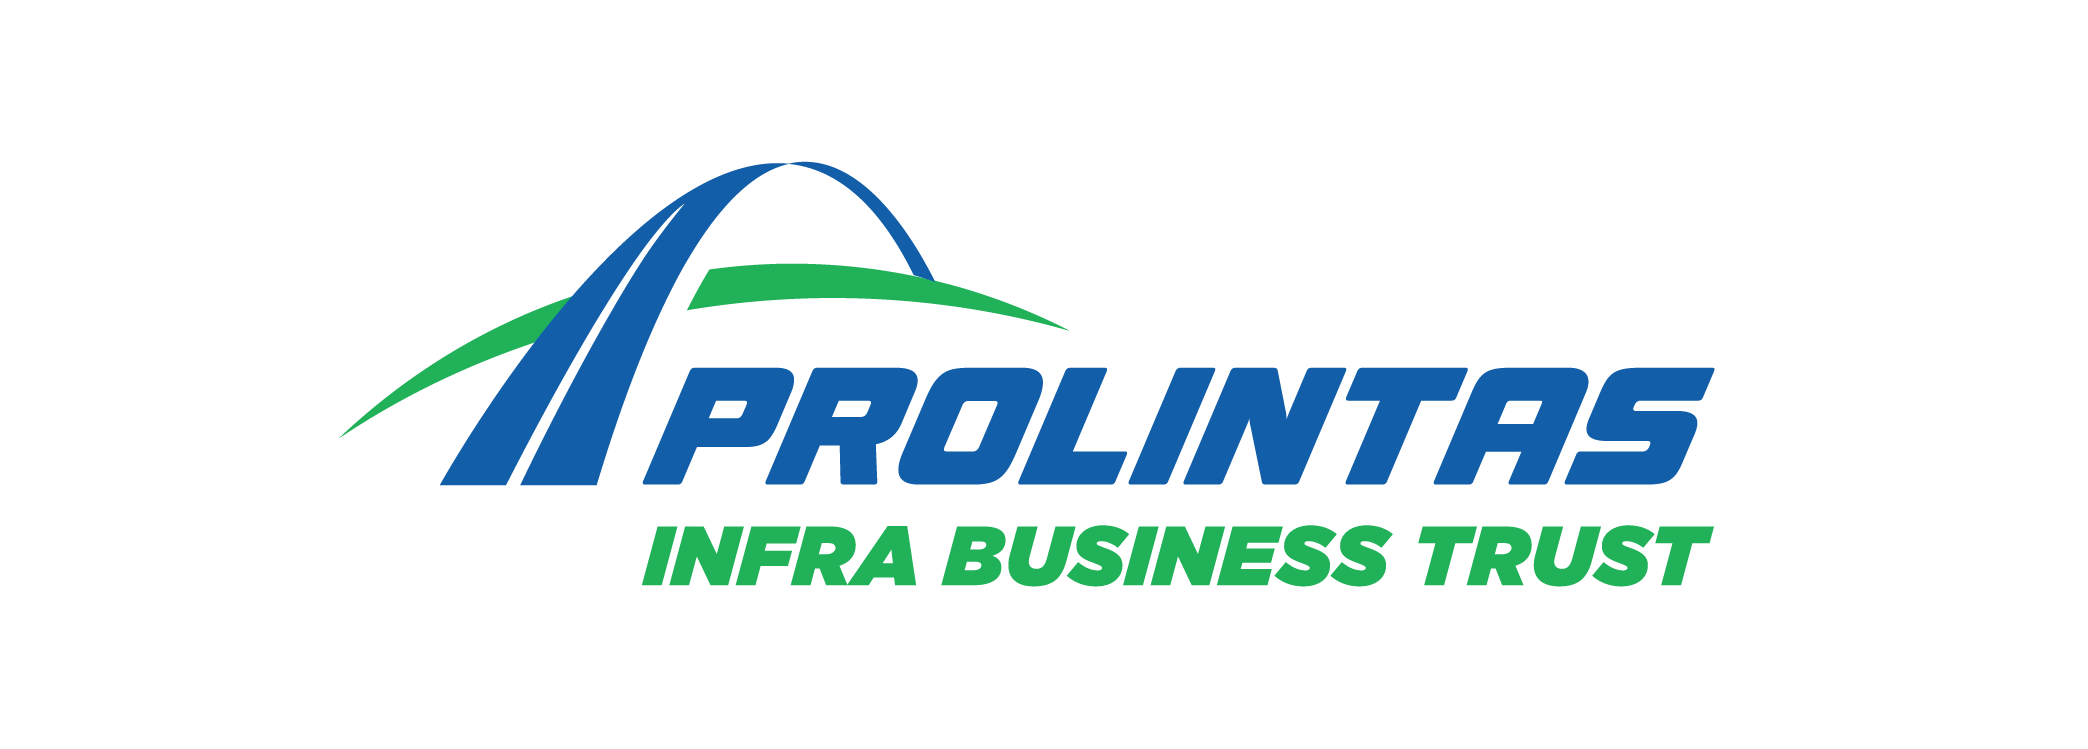 PUBLIC PORTION OF PROLINTAS INFRA BUSINESS TRUST’S IPO OVERSUBSCRIBED BY 3.59 TIMES